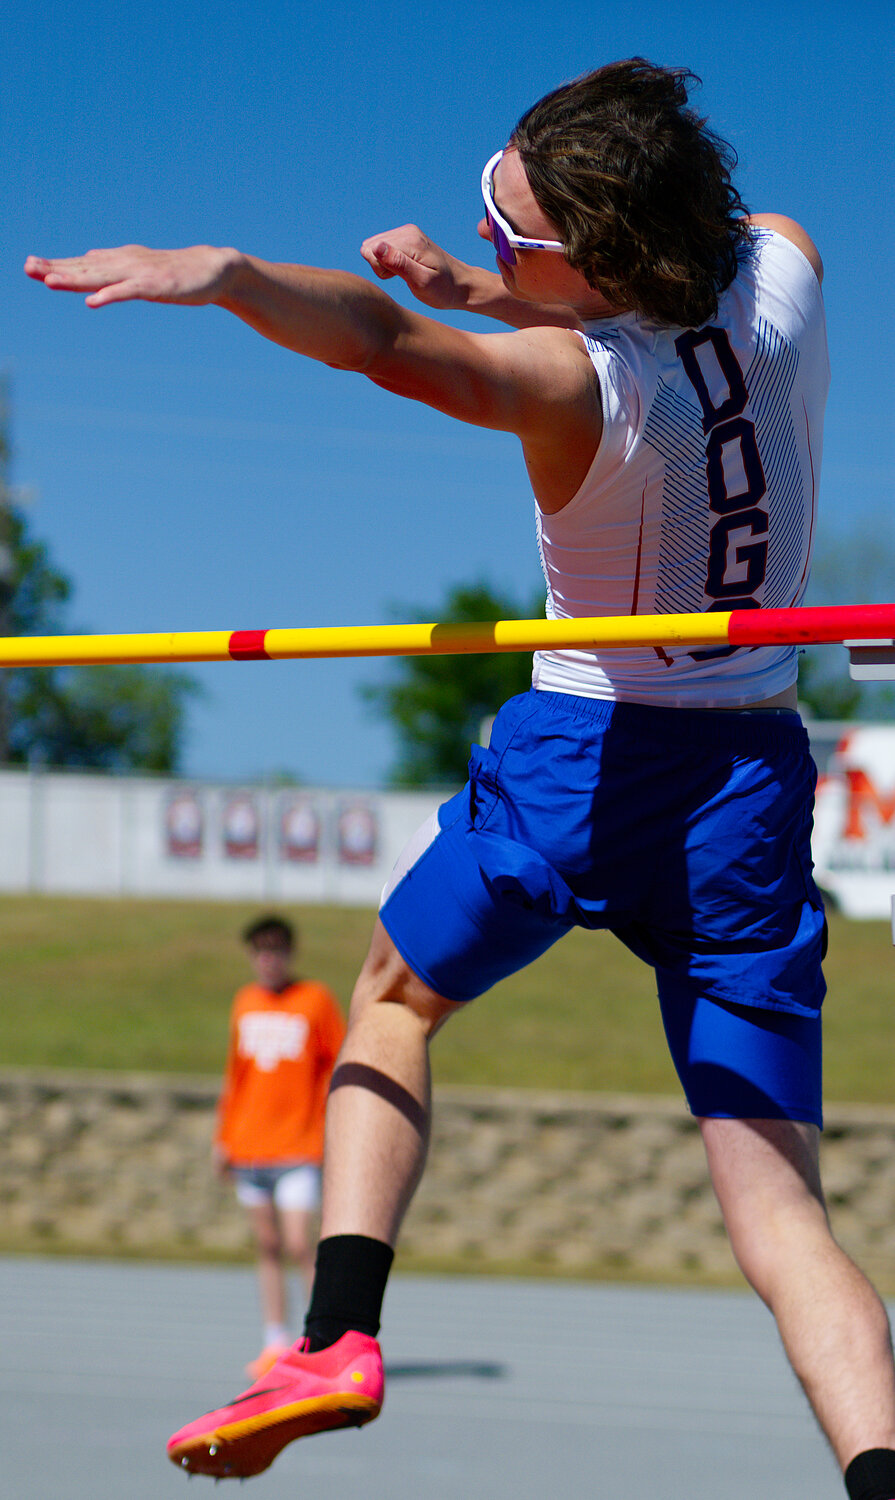 Bryson Hobbs' 5'8" leap captured second place in the high jump for Quitman. [see more speed and strength on display]